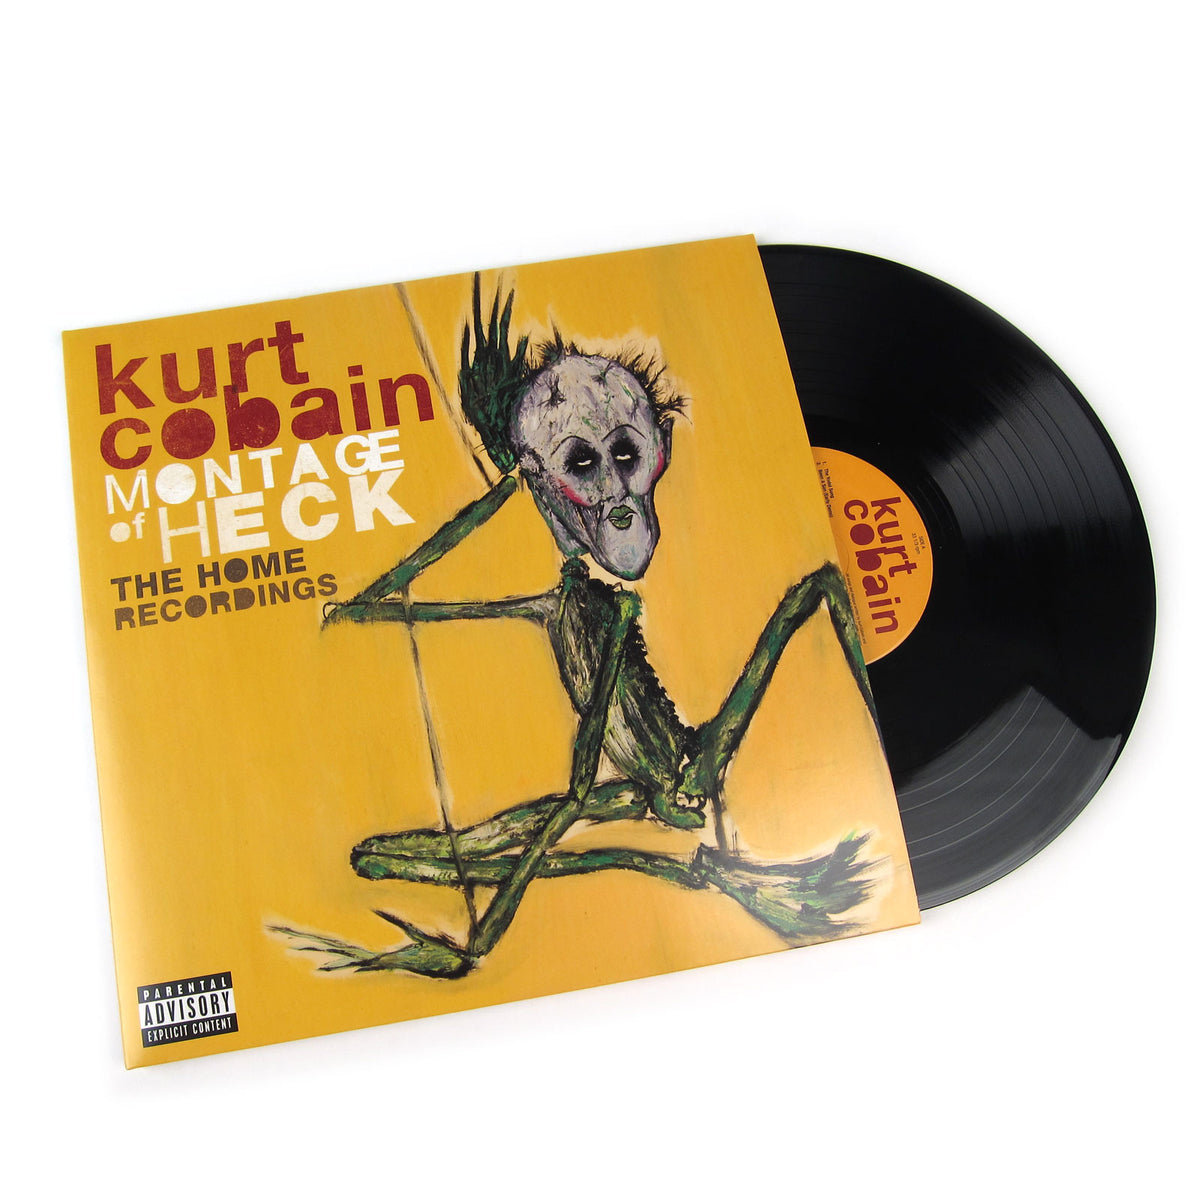 Kurt Cobain - Montage Of Heck: The Home Recordings LP